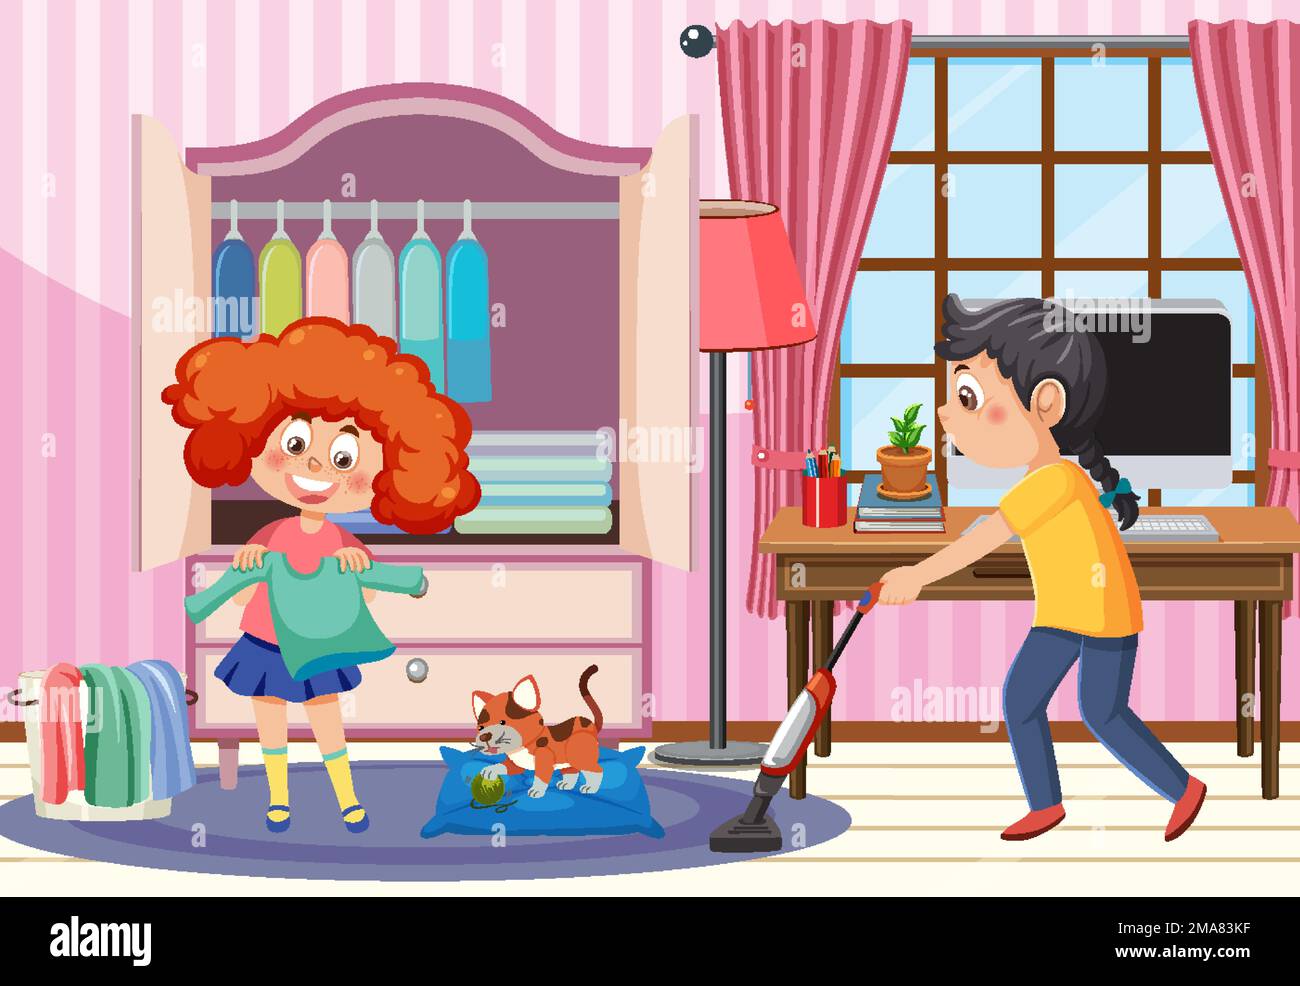 Cartoon children cleaning the house illustration Stock Vector Image ...